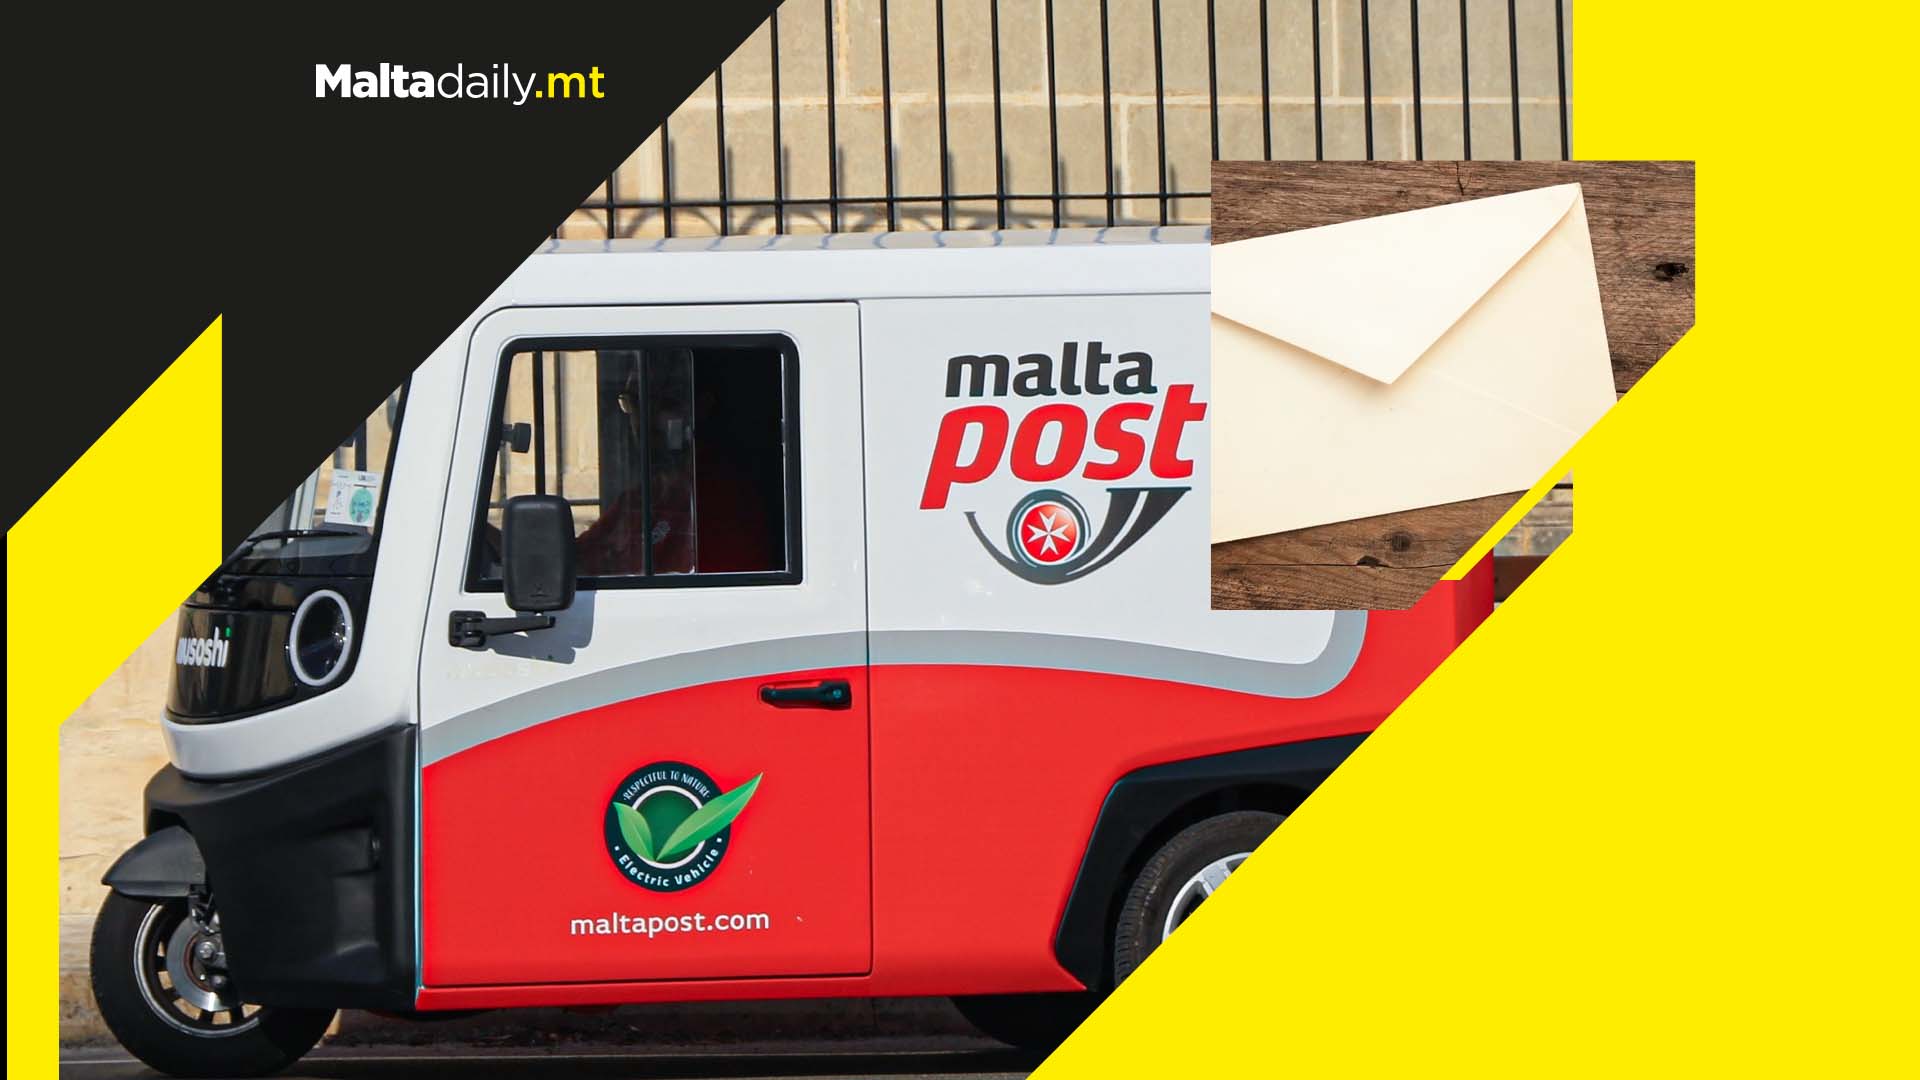 Postage tariffs raised by Maltapost to make up for delivery losses